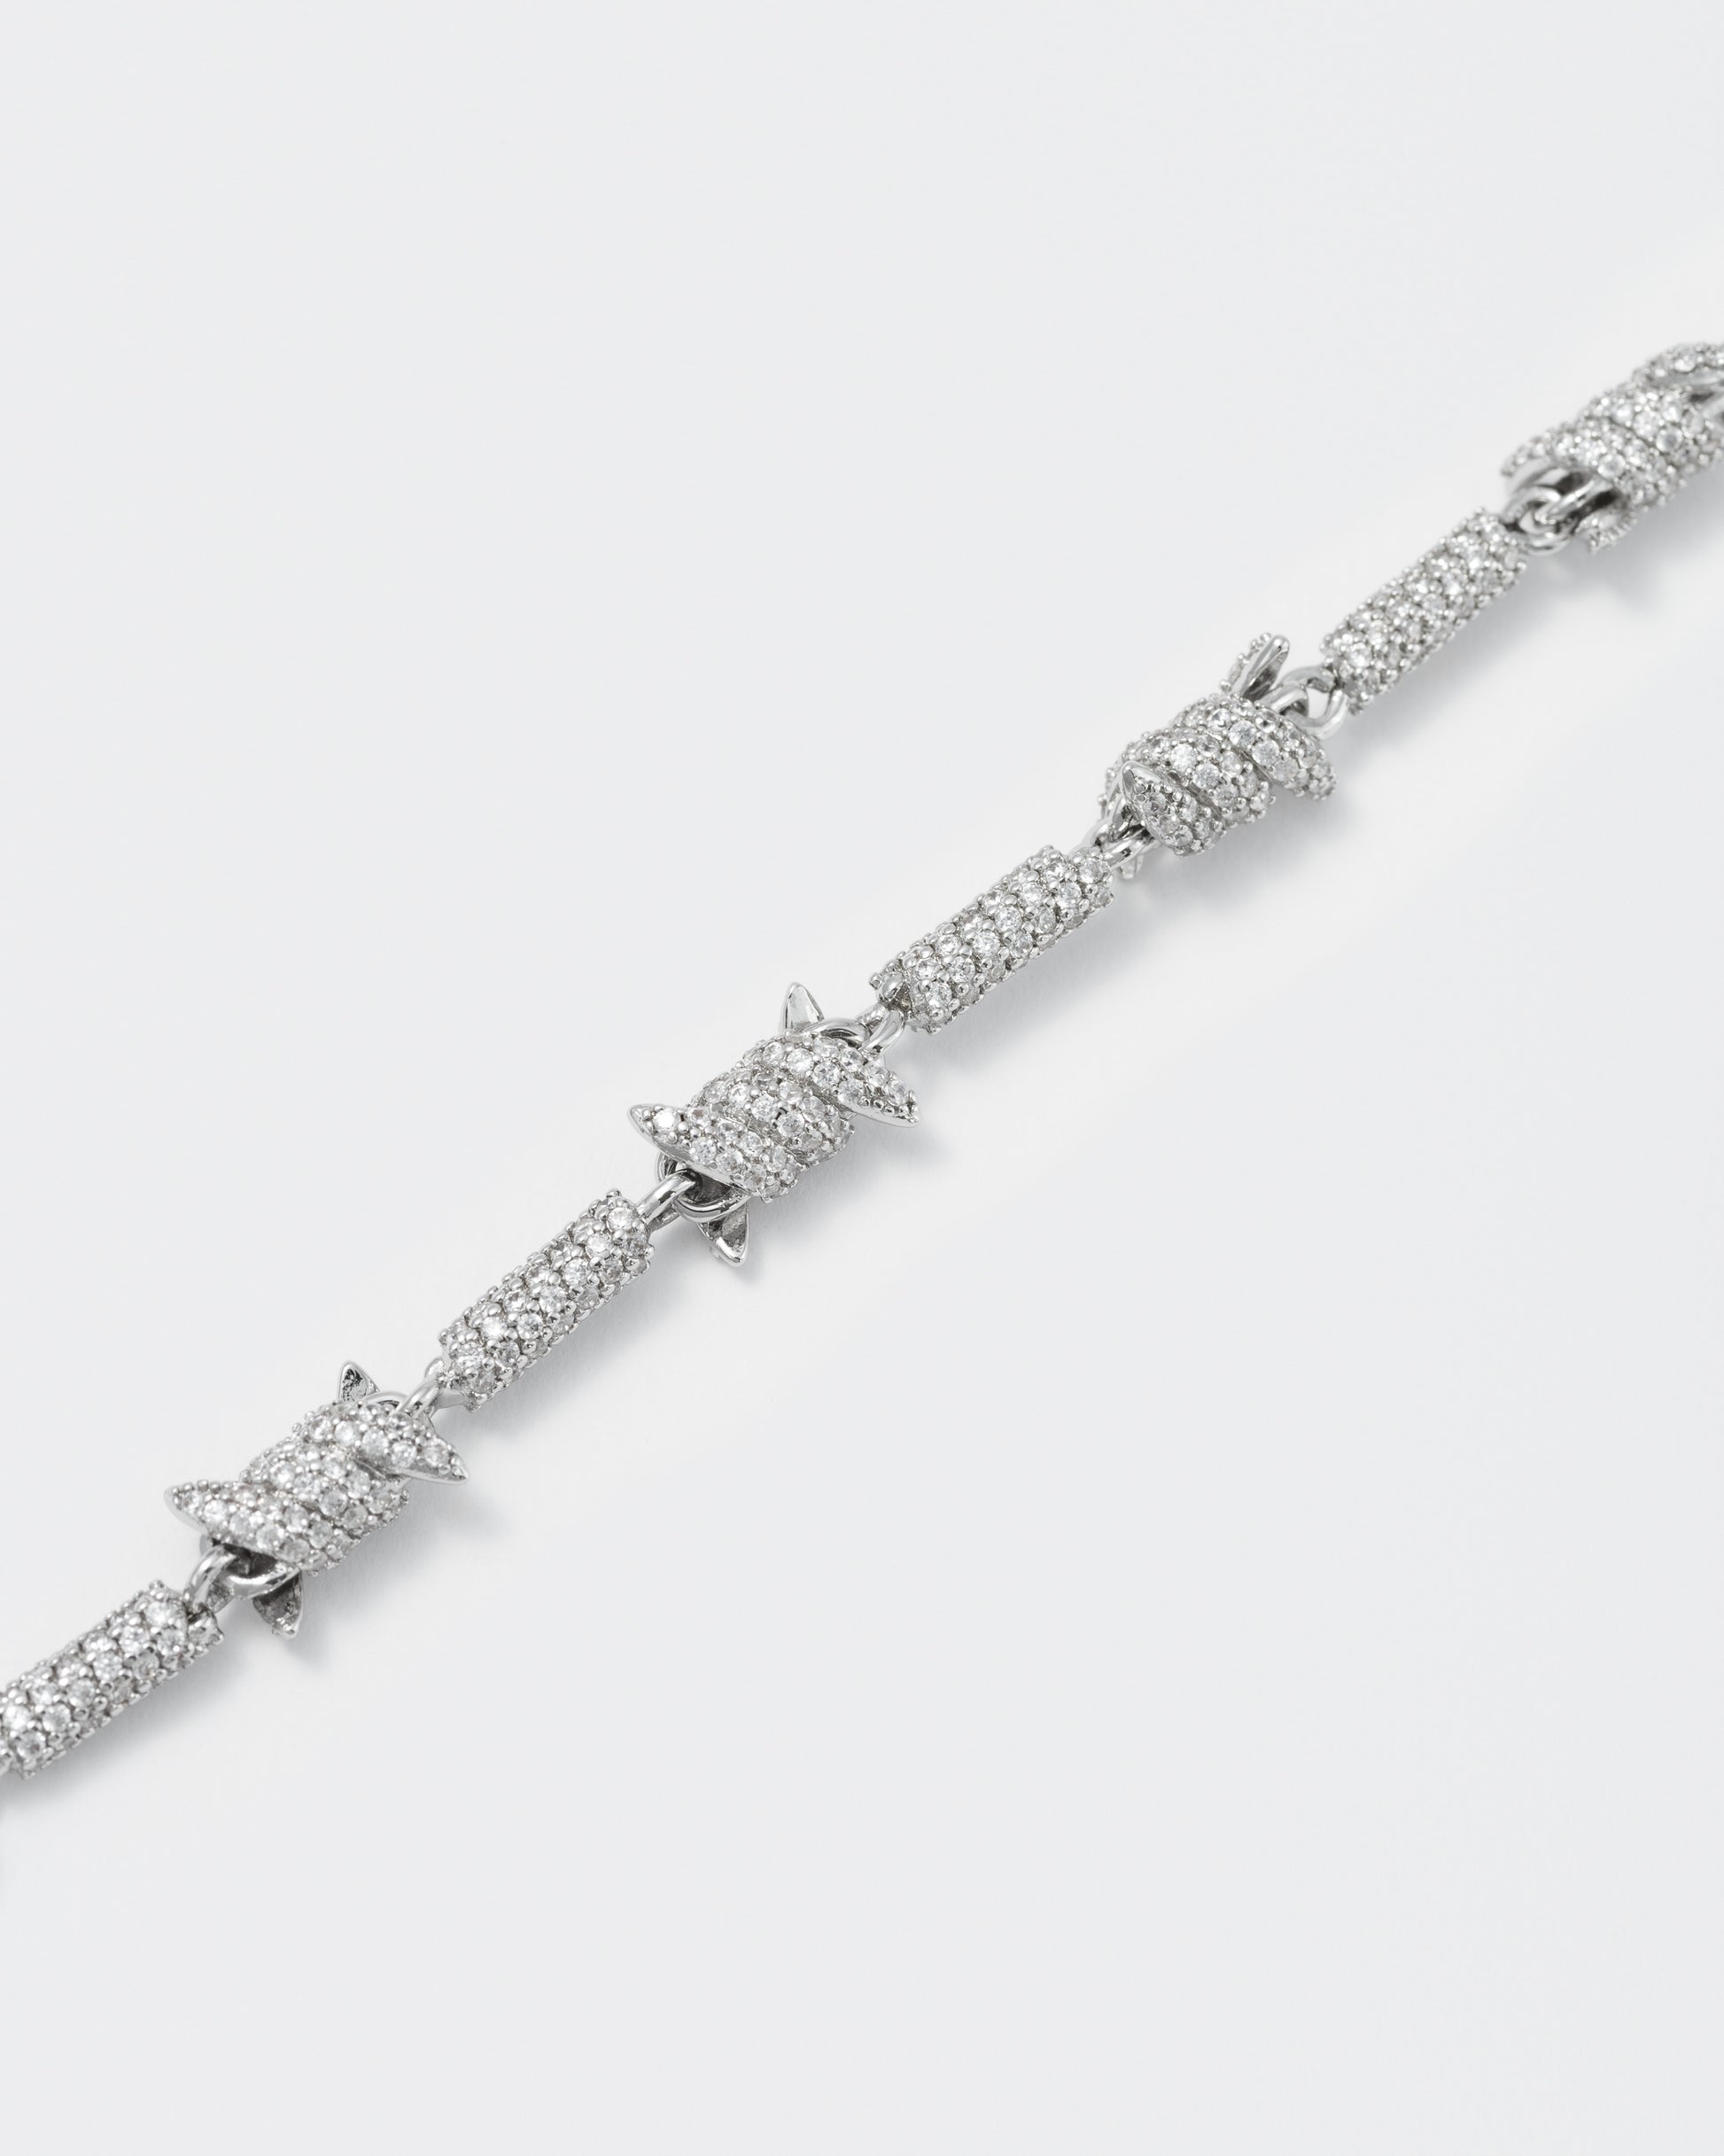 detail of barbed Wire necklace with 18kt white gold coating and hand-set micropavé stones in diamond white. Lobster clasp closure with logo